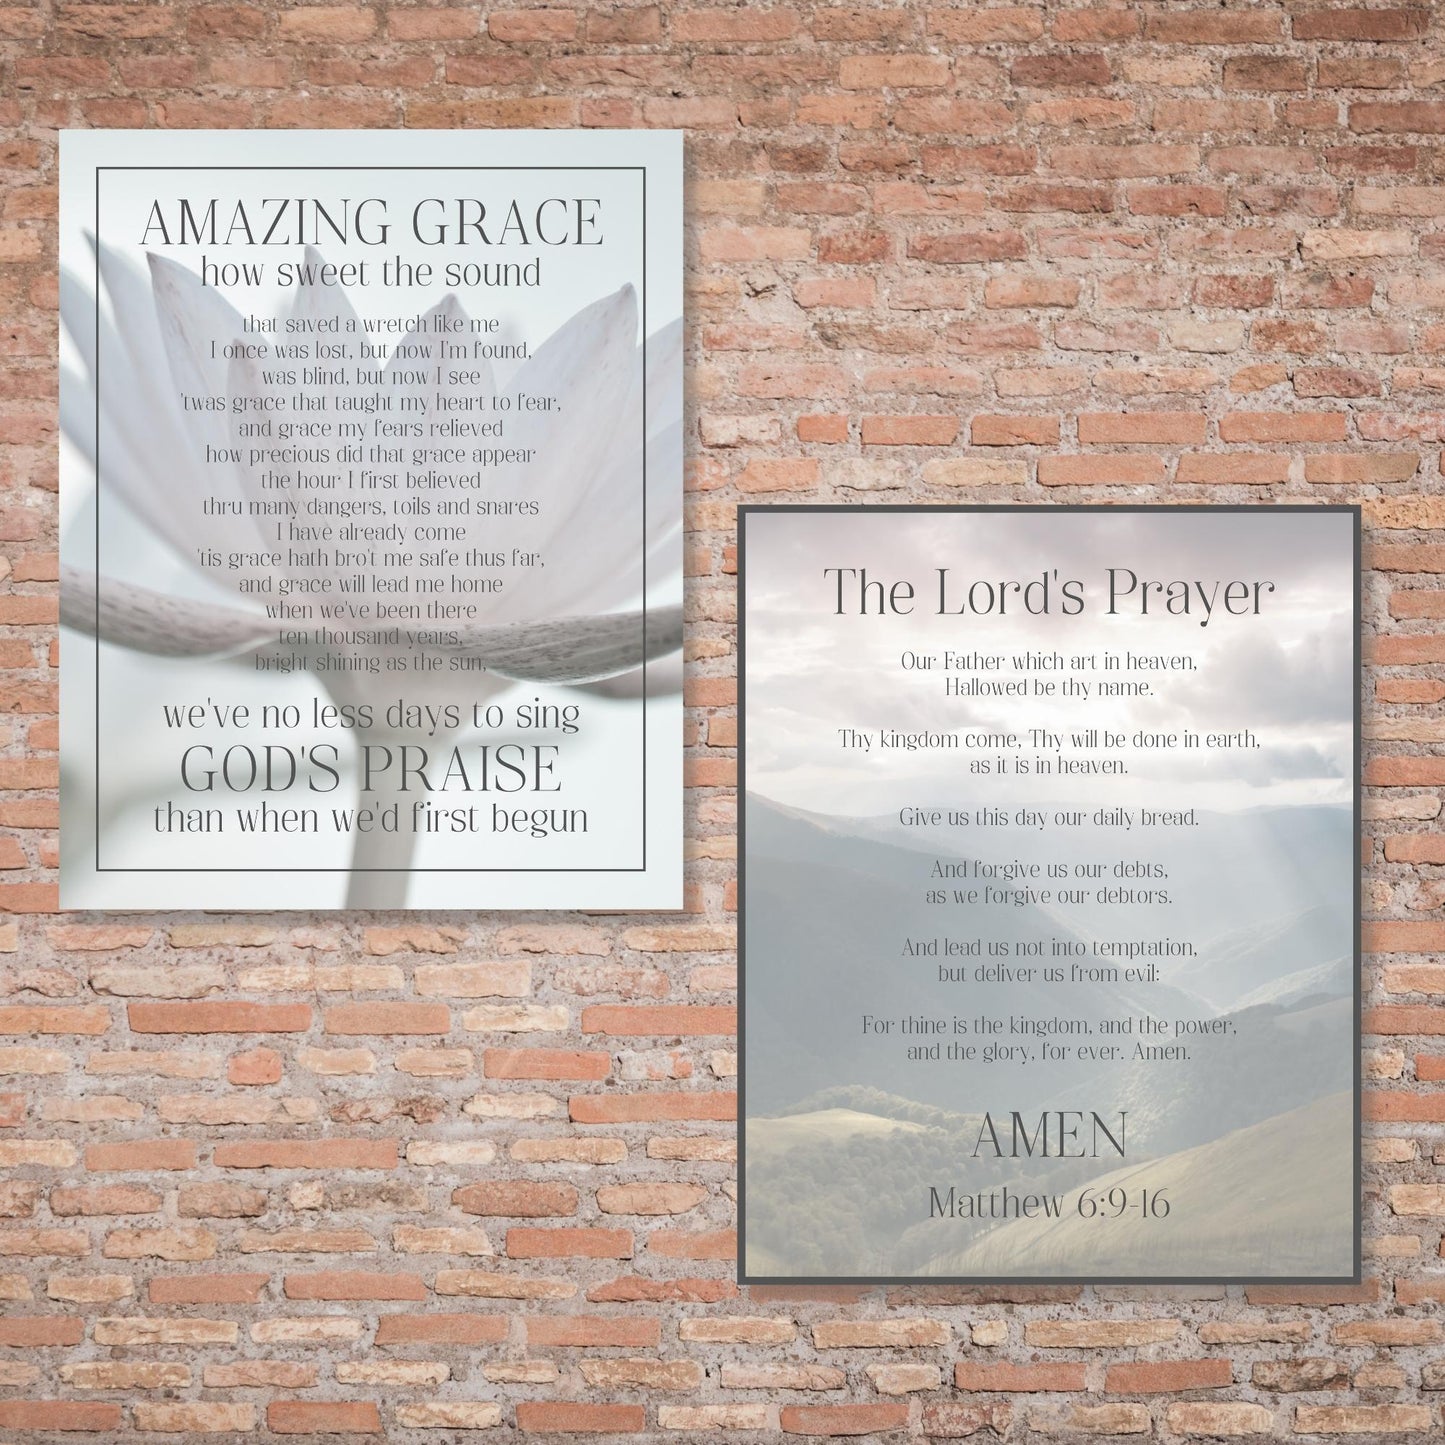 Inspirational Bible Verse Wall Art - The Lord's Prayer, Our Father (Matthew 6:9-16) Christian Wall Poster (16x20) | Shown on brick wall with complementary Christian wall poster - Amazing Grace Song Lyric Wall Art | oak7west.com